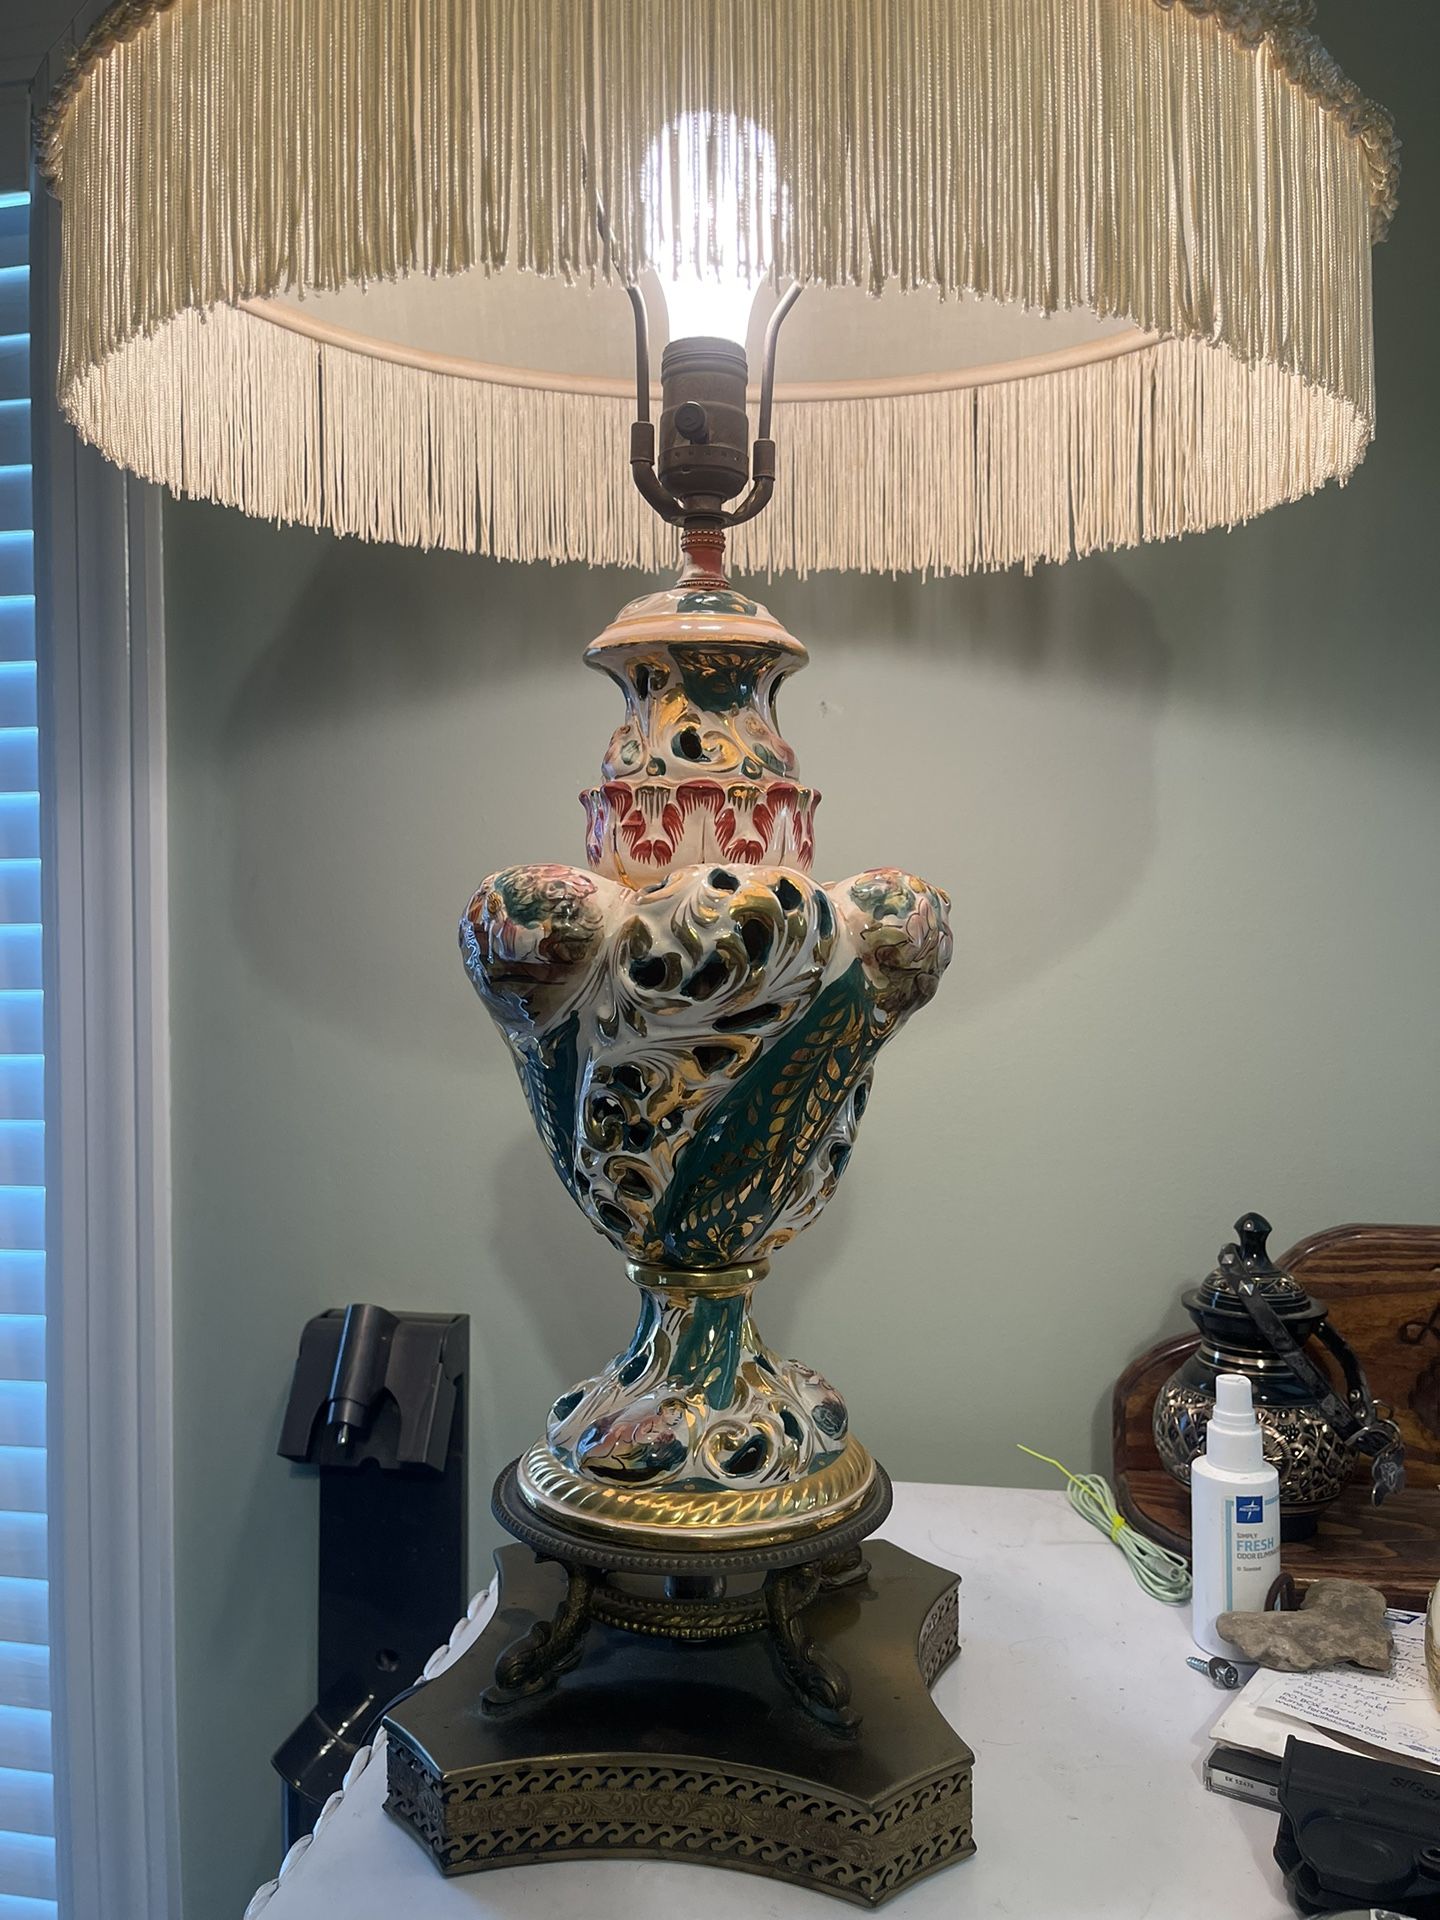 Signed & Numbered Vintage Capodimonte Lamp